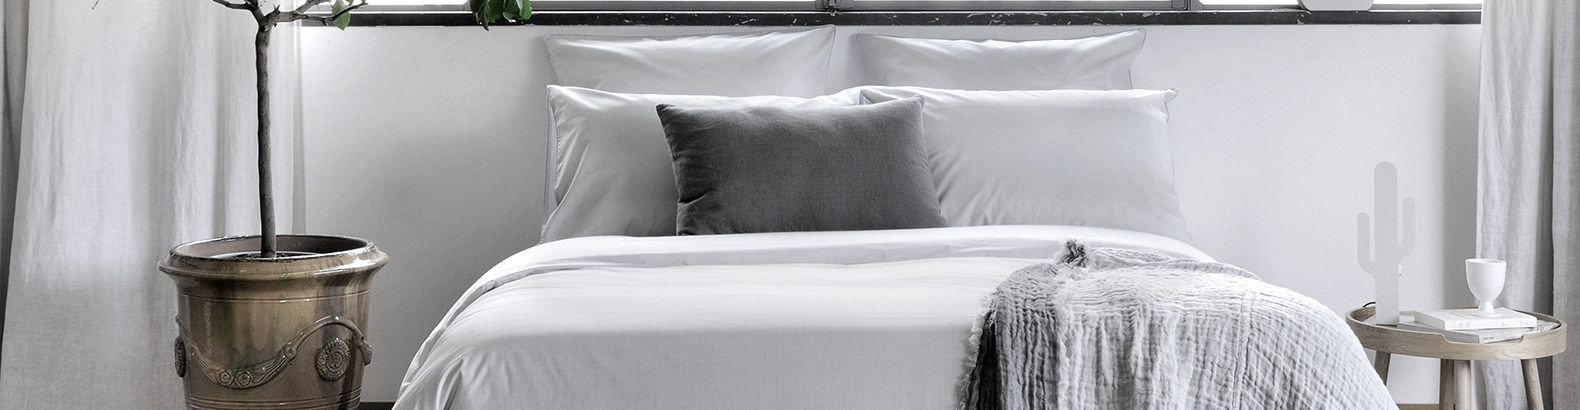 To choose your bed linen, you need to know about the different materials and weaves.